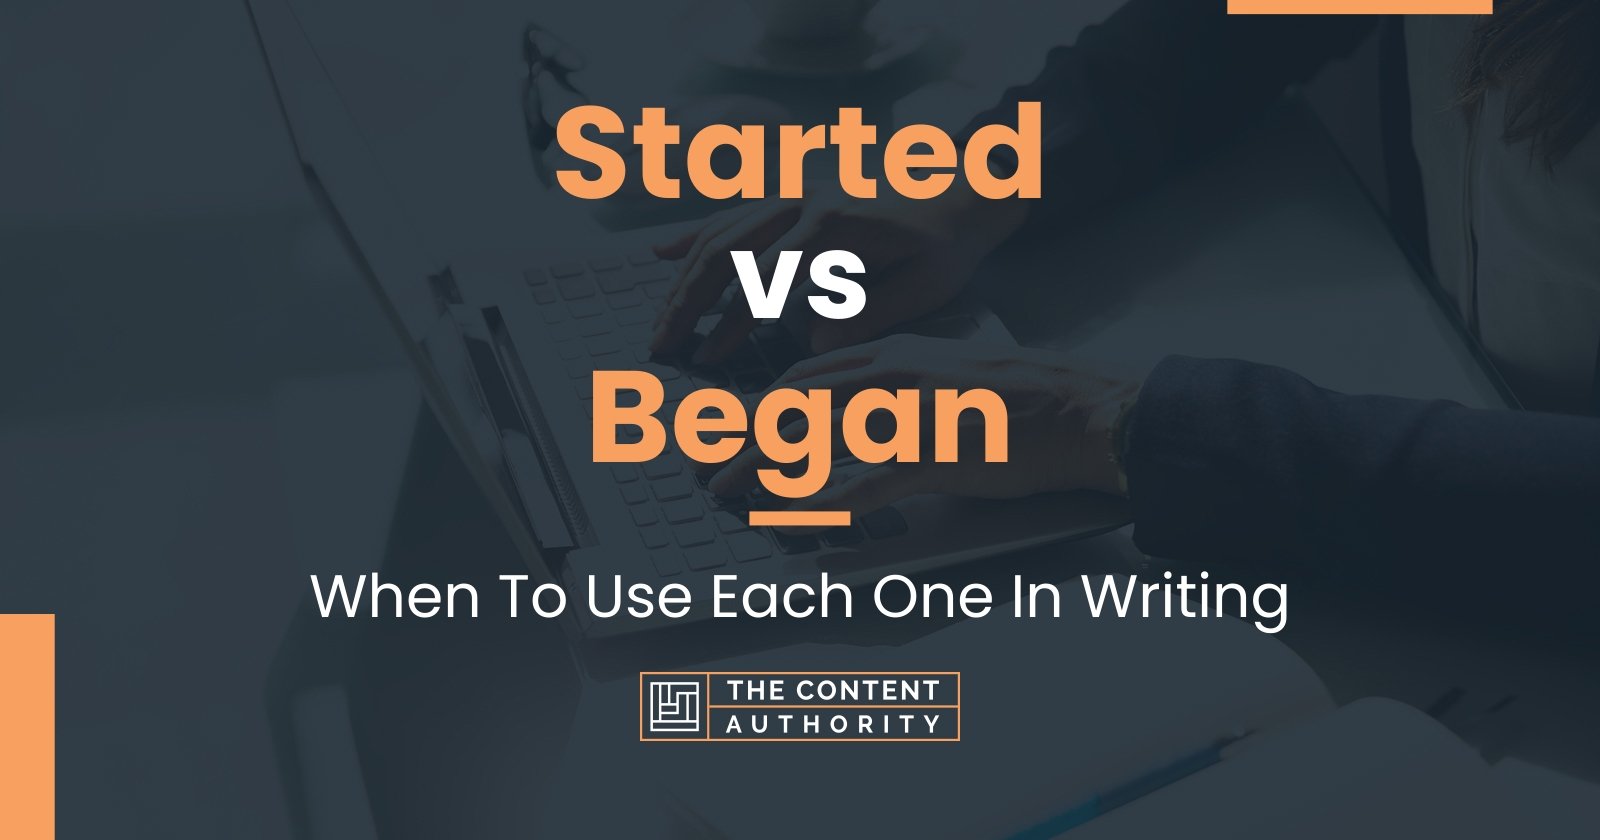 Started vs Began: When To Use Each One In Writing